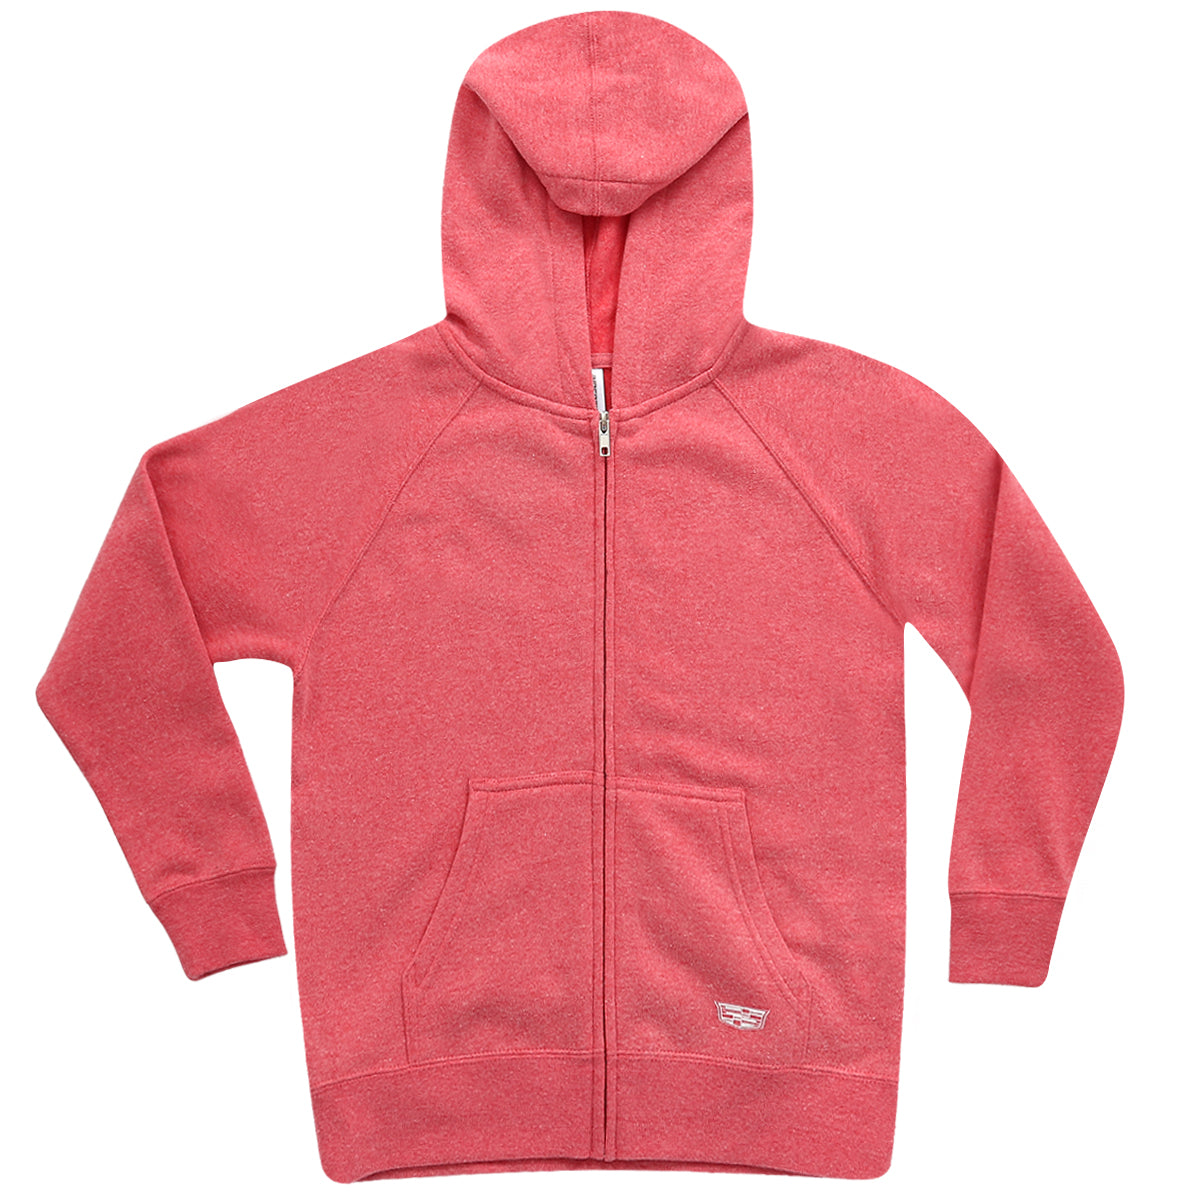 Cadillac Youth Full Zip Hoodie - Pomegranate